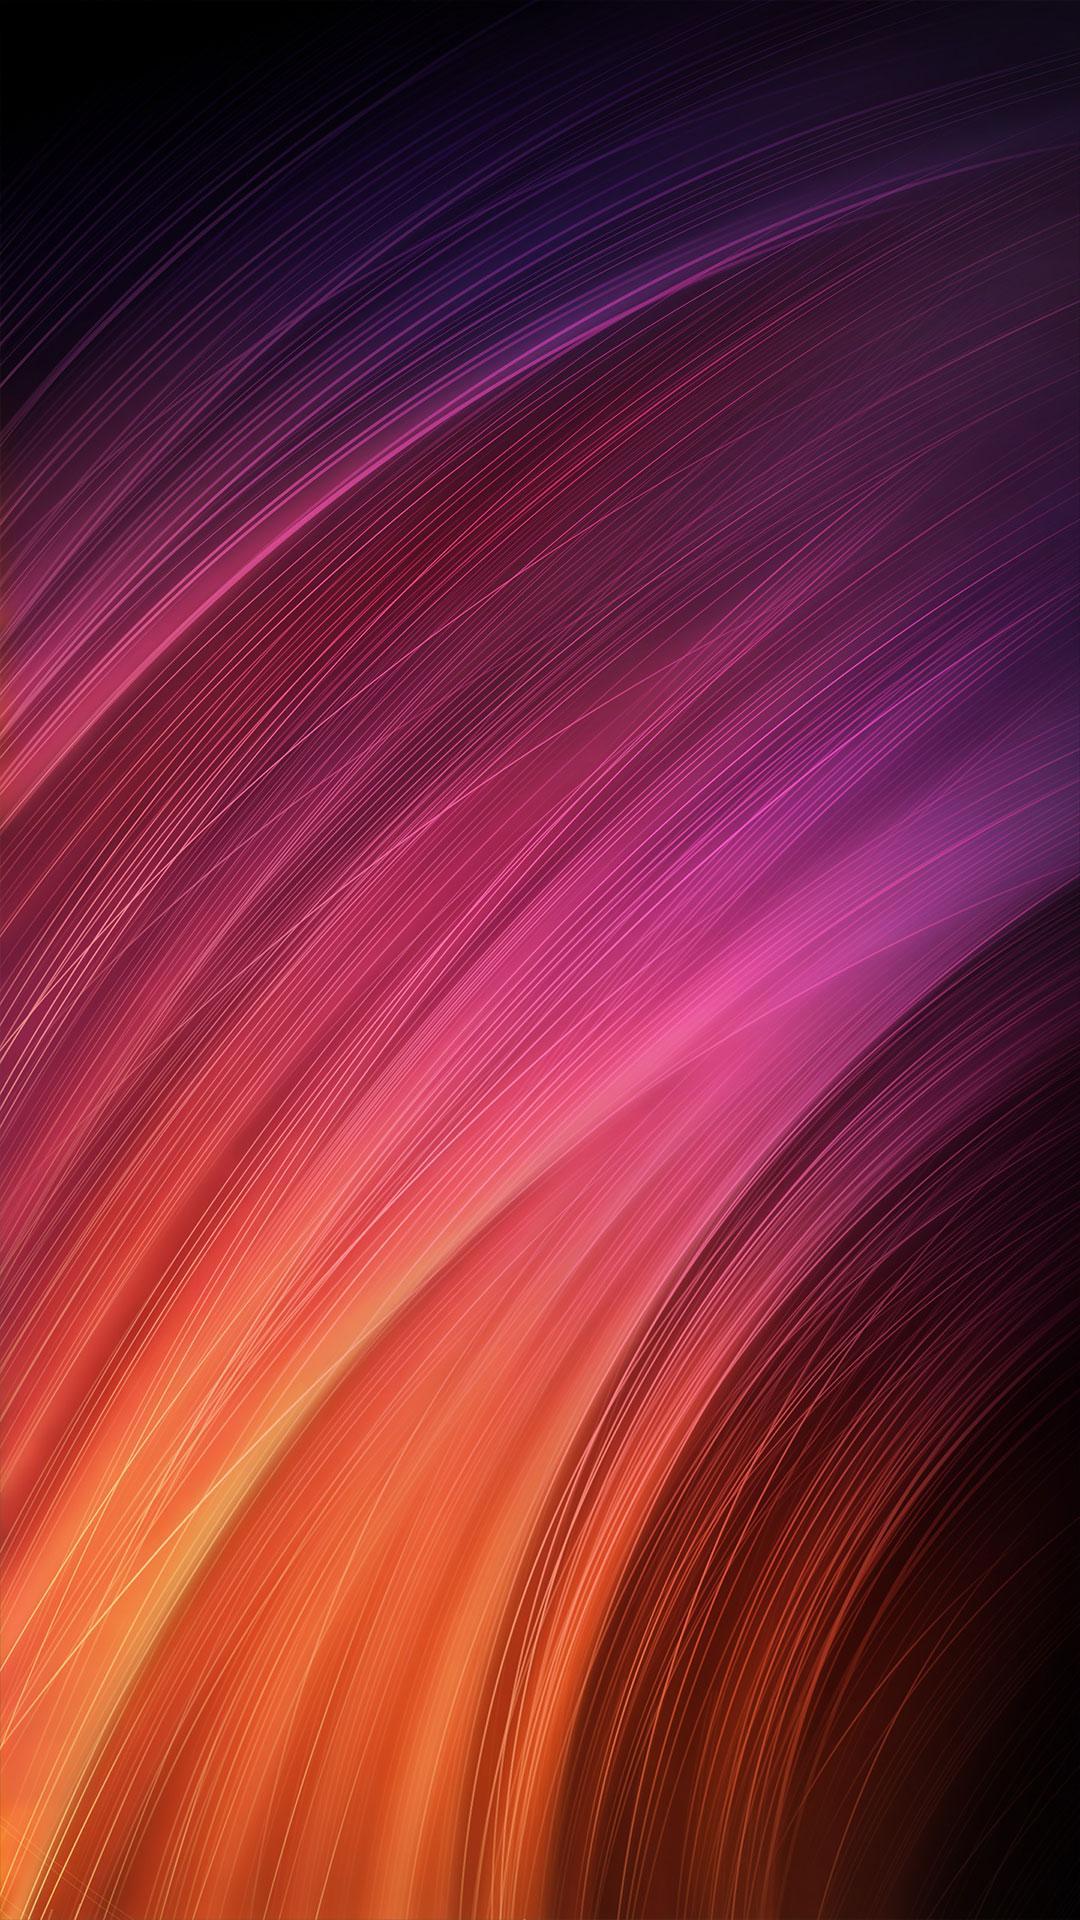 Wallpapers For Xiaomi Redmi Note 4 4a 4x For Android Apk